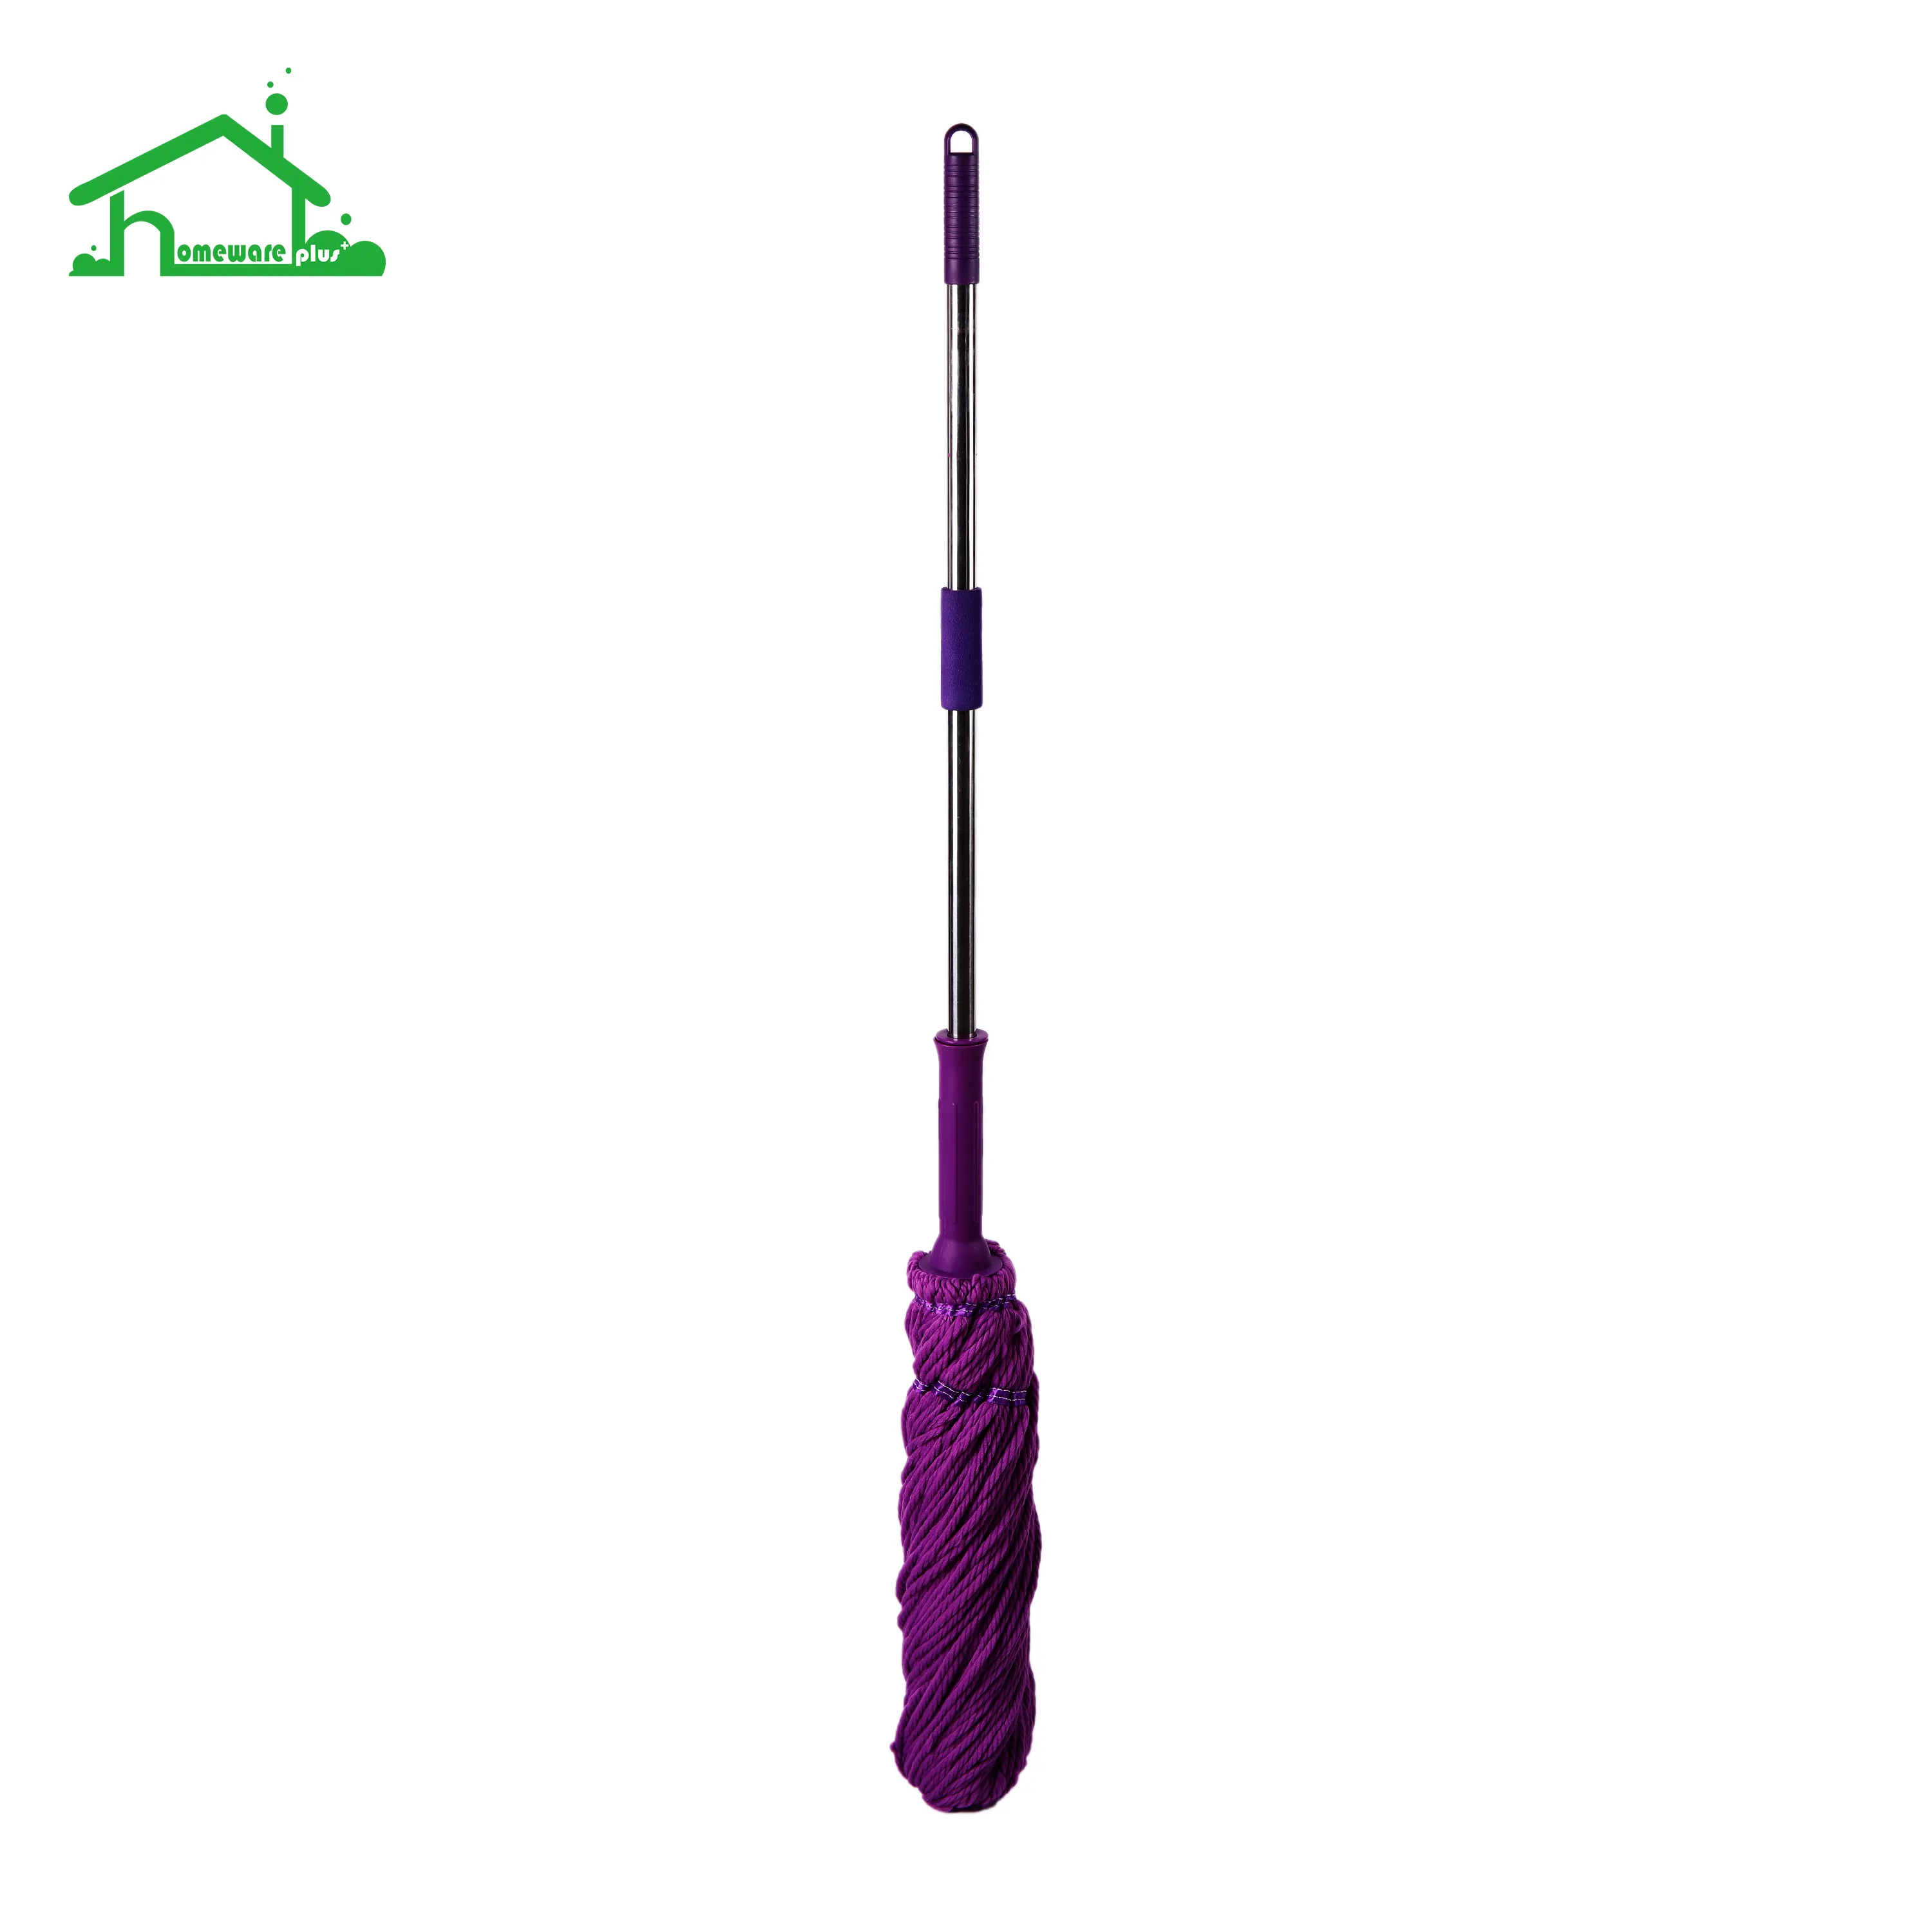 Cleaning microfiber twist floor mop with stainless steel handle violet easy cleaning